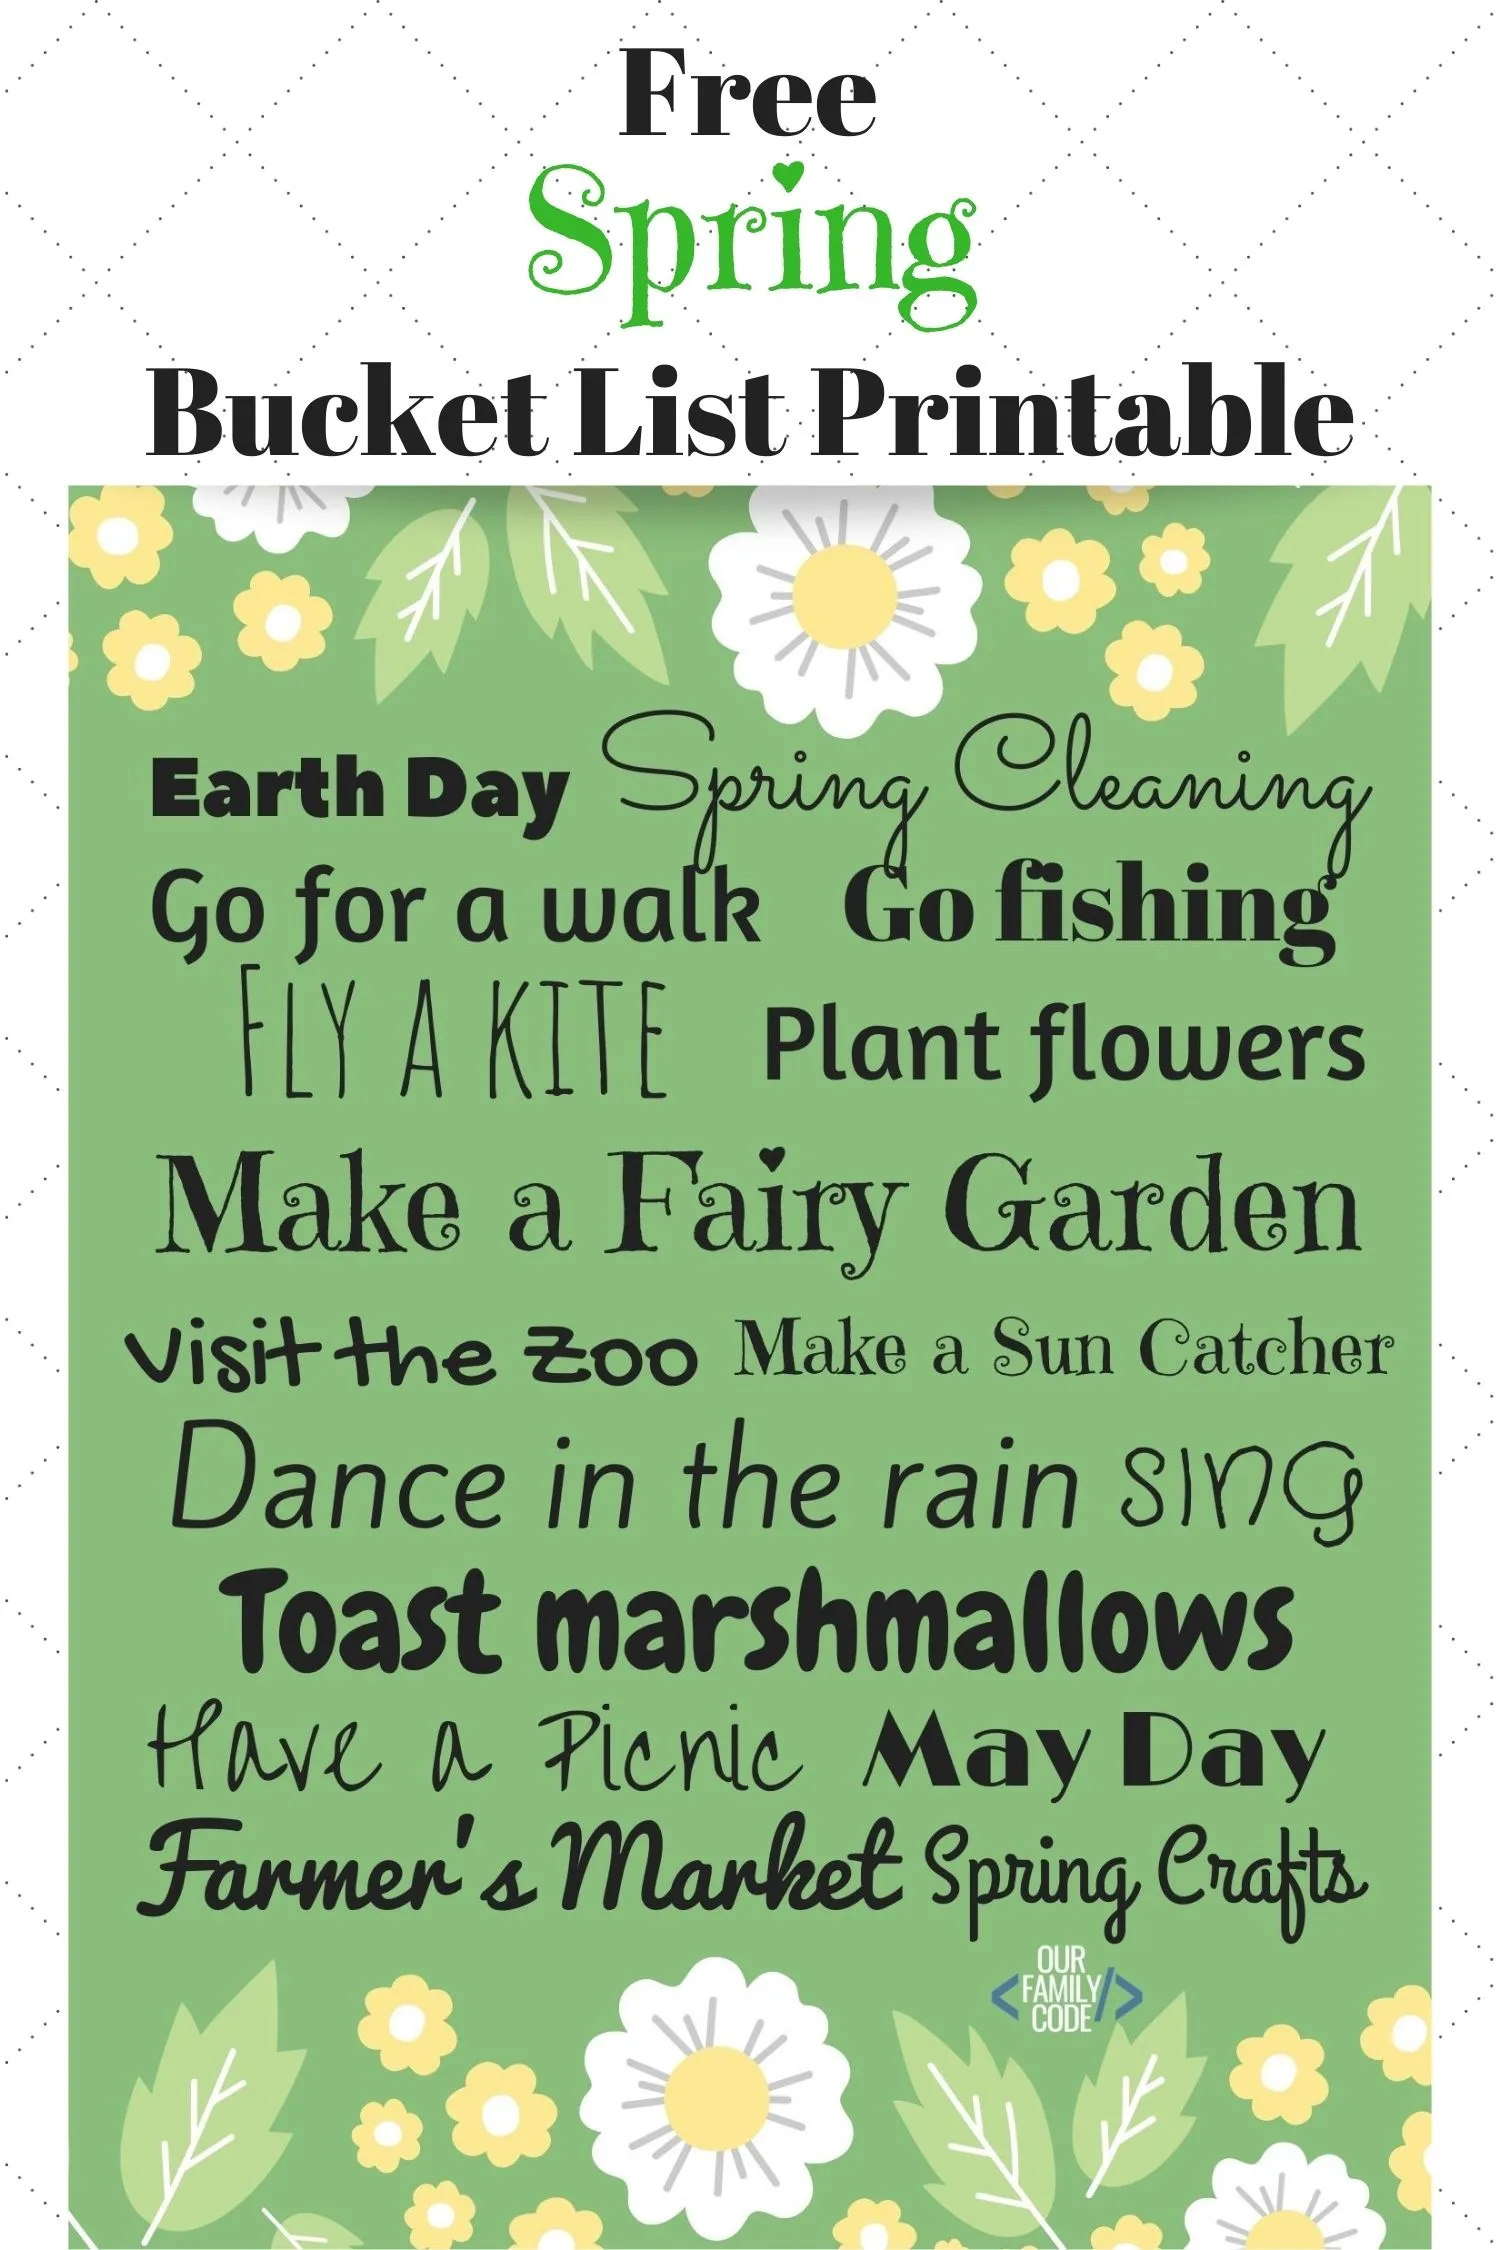 A picture of a Spring Bucket List Printable on white background.